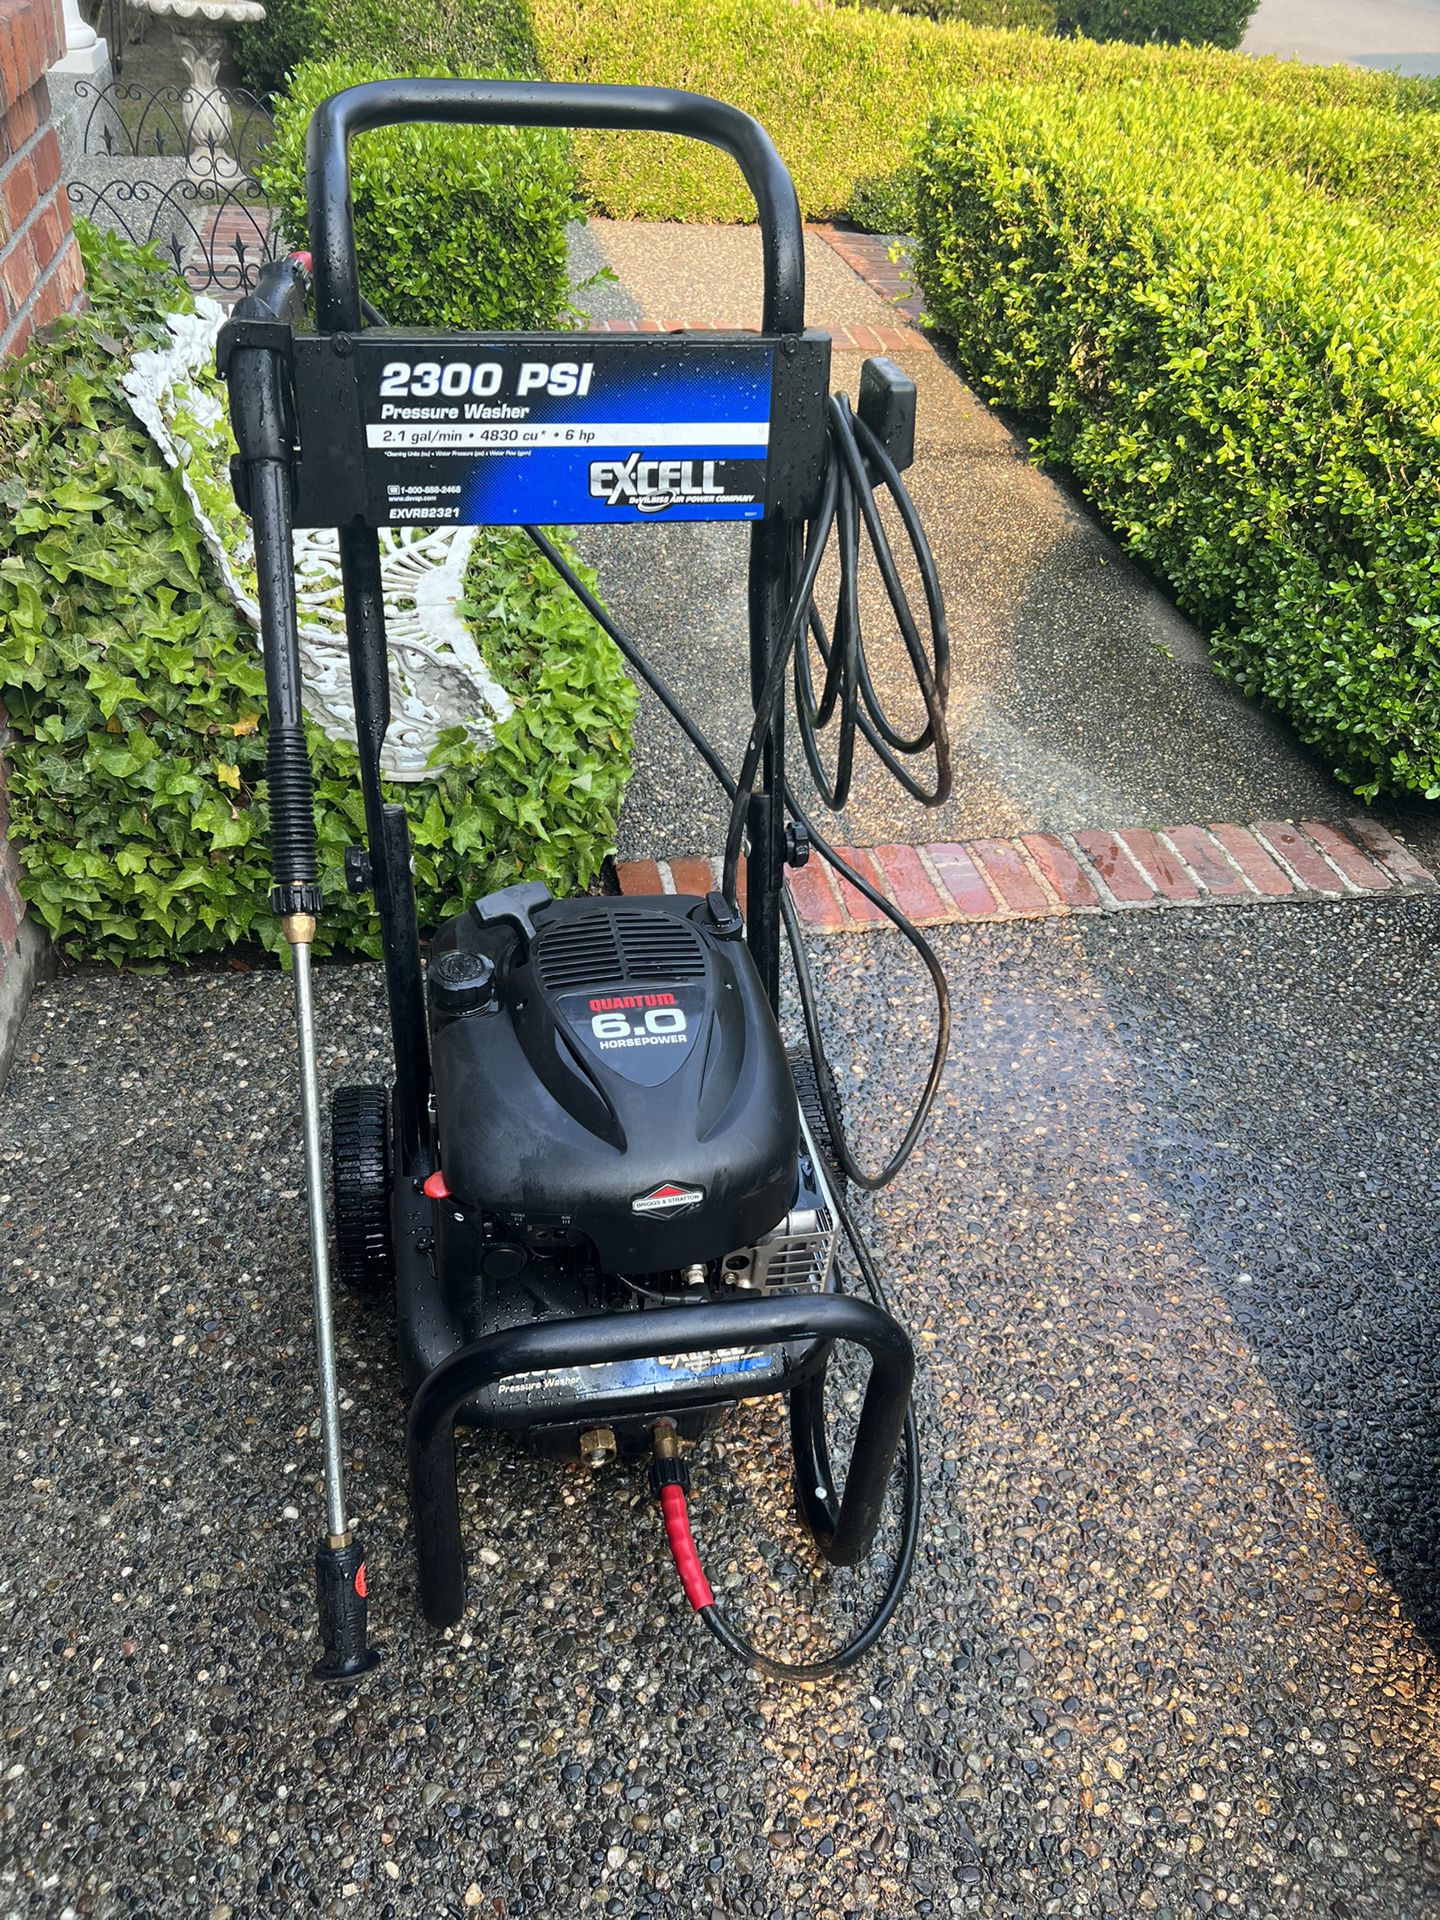 NICE EXCELL GAS PRESSURE WASHER! 6 HP 2300 PSI! STARTS AND RUNS GREAT!